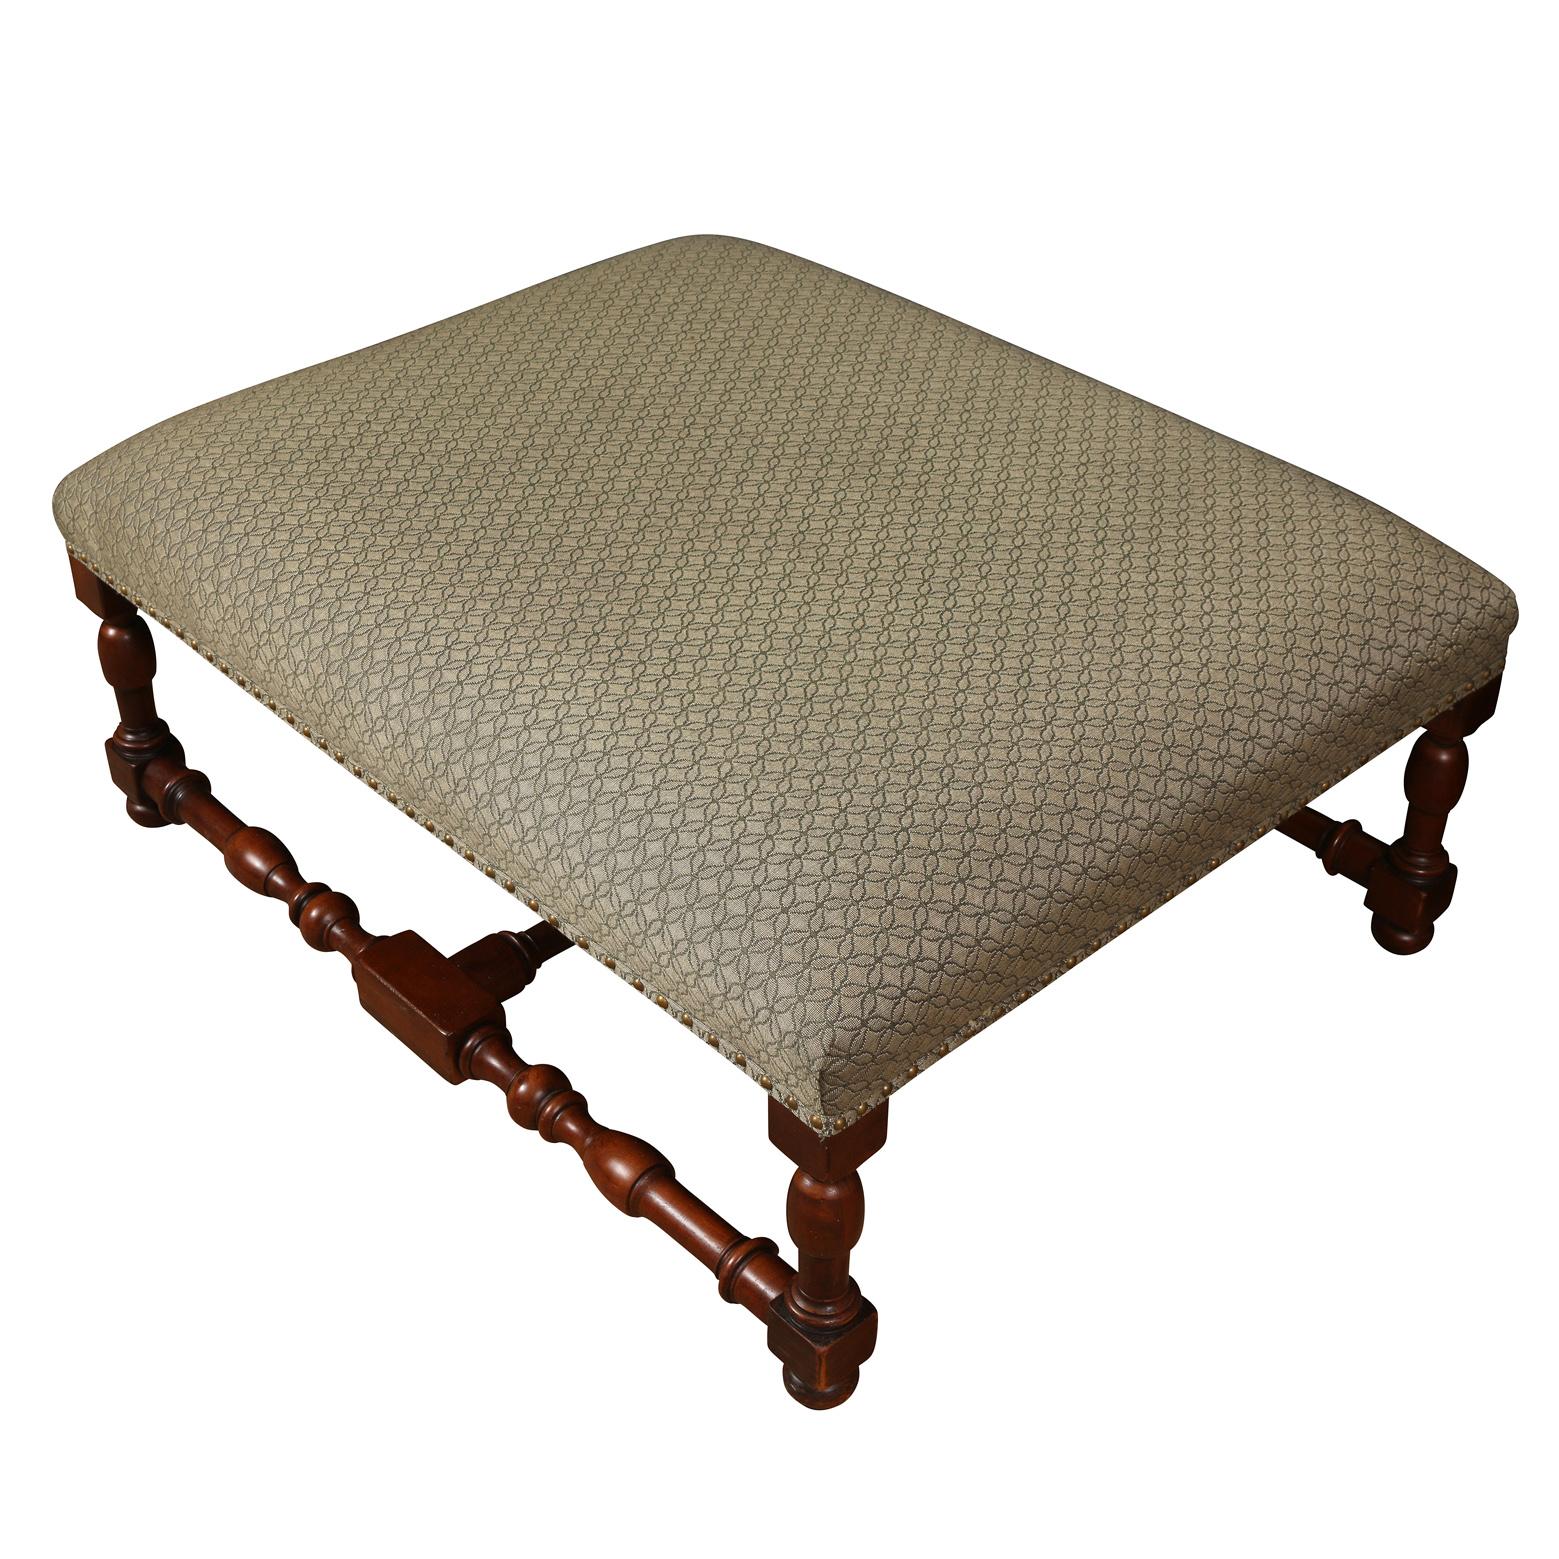 20th Century A Large Square Upholstered Ottoman